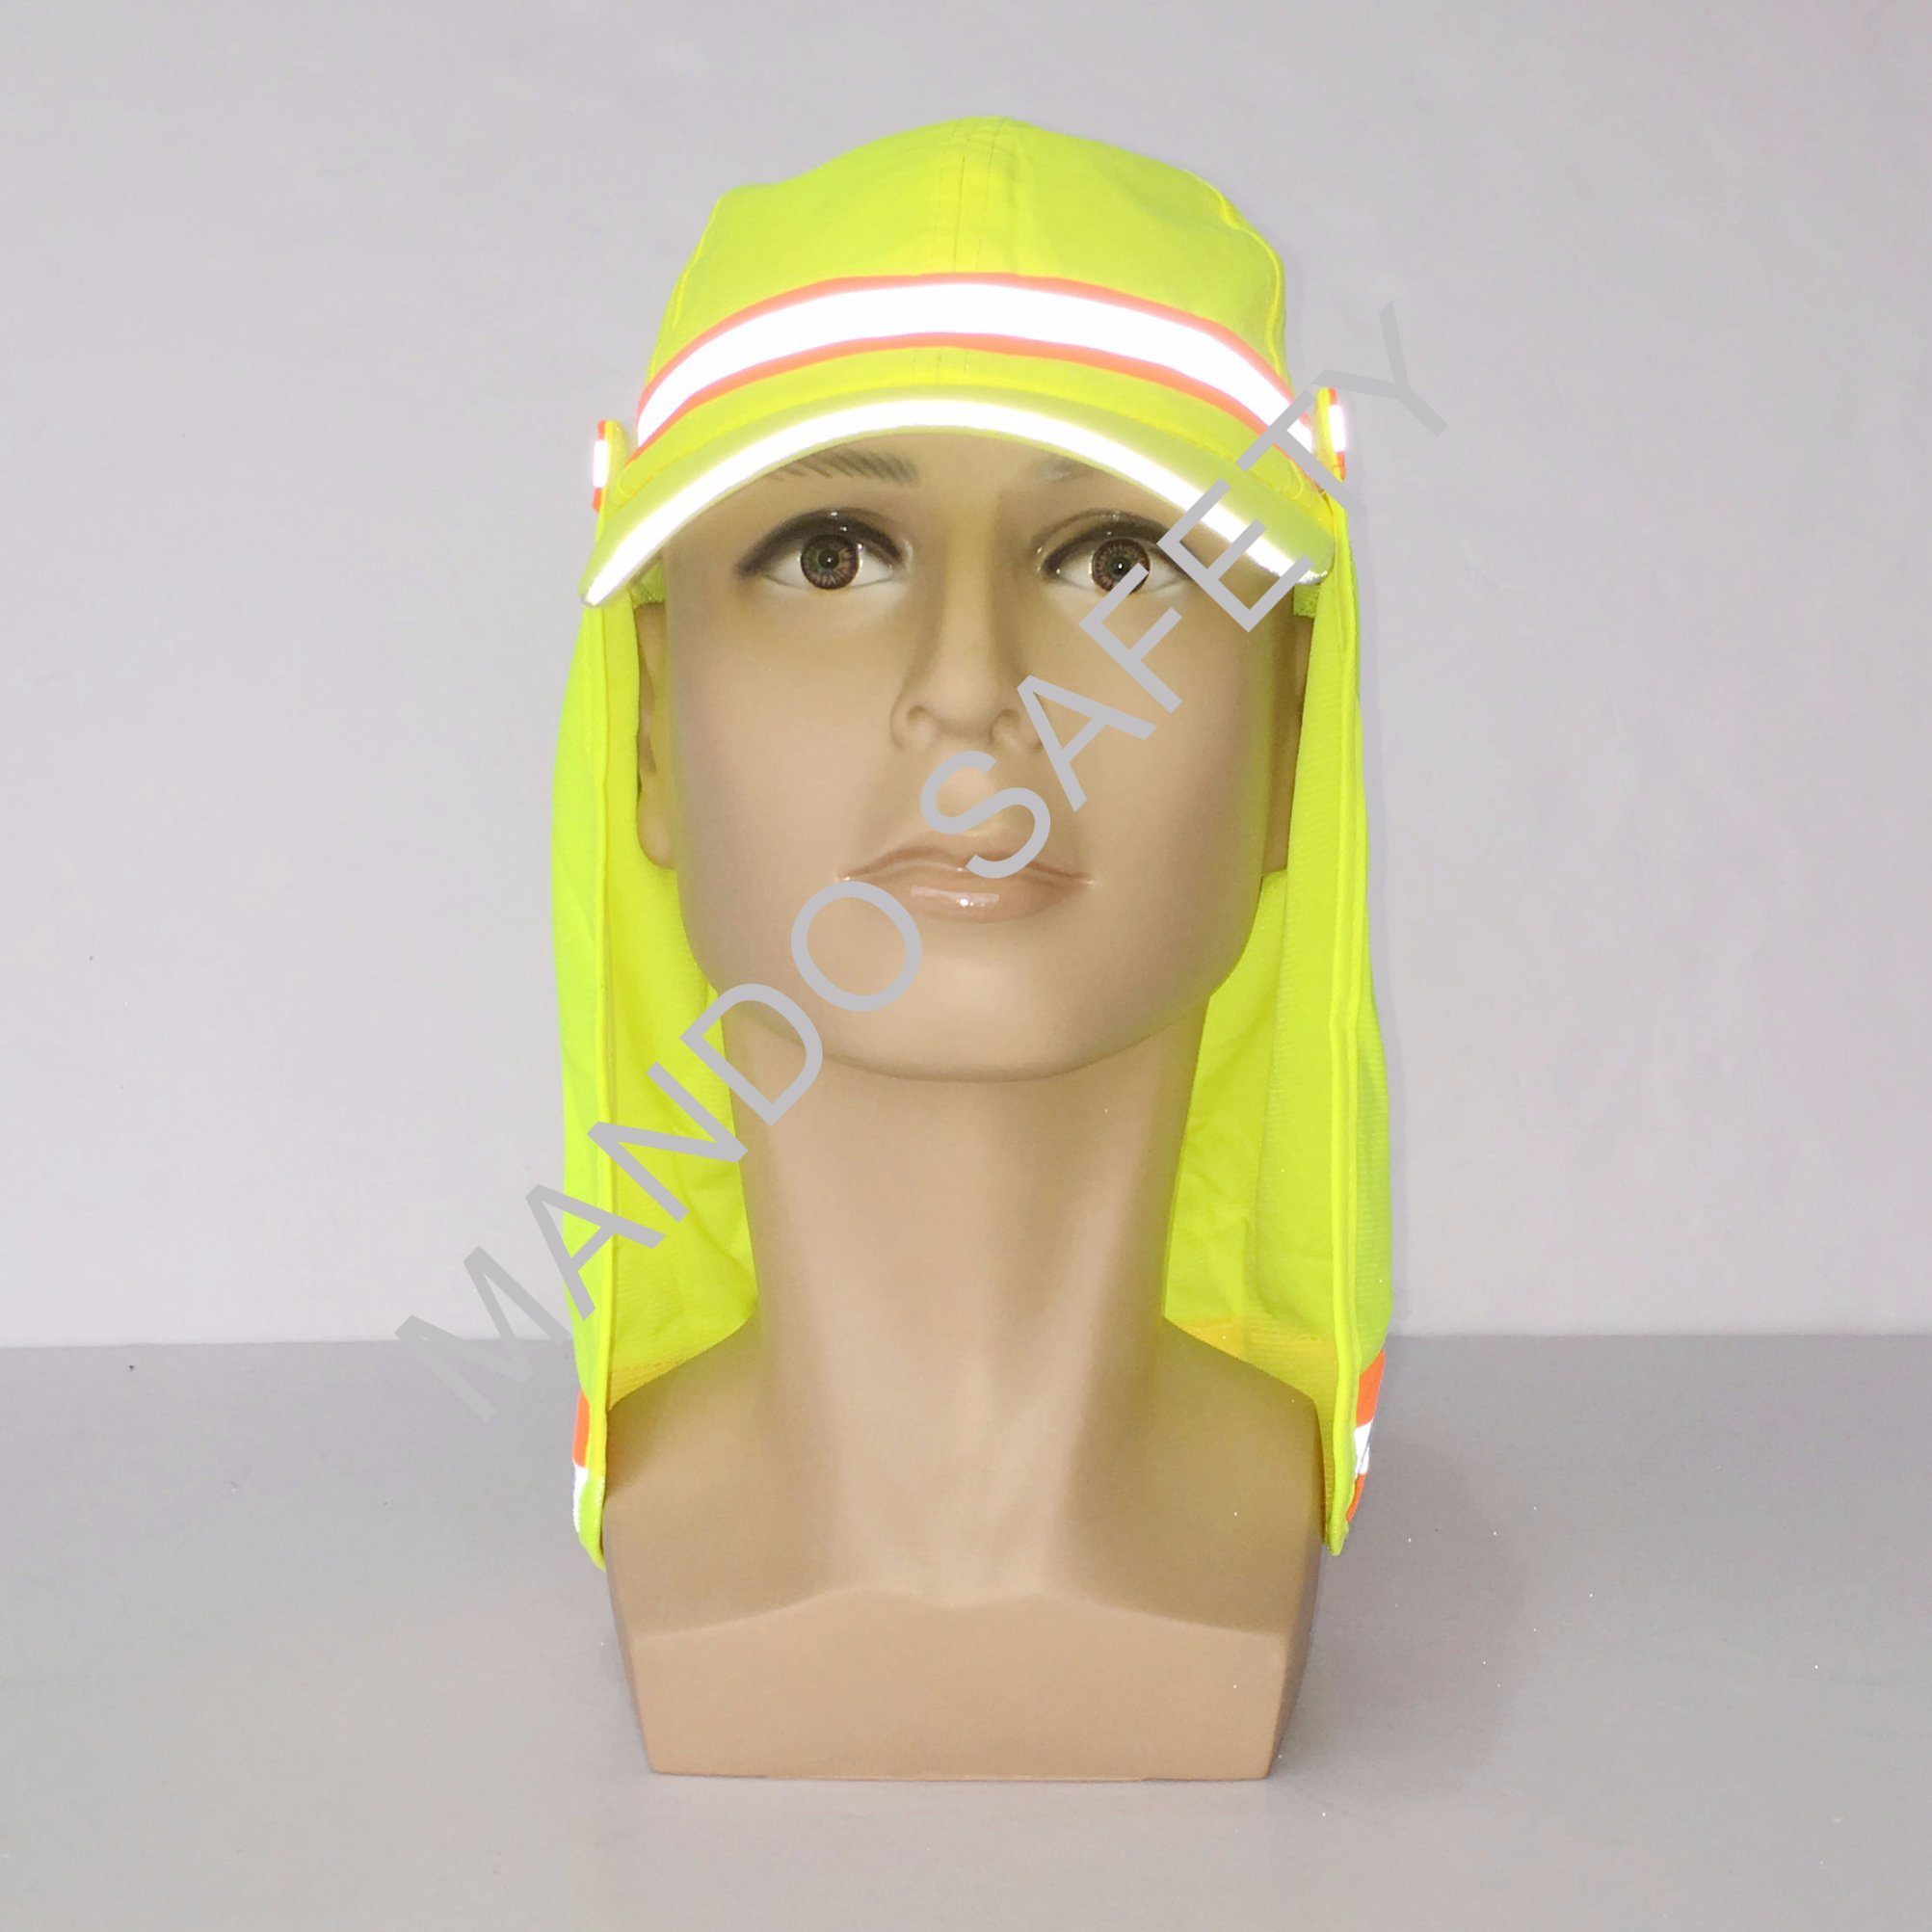 Wholesale Polyester Taslon Helmet Cap with Reflective Tapes